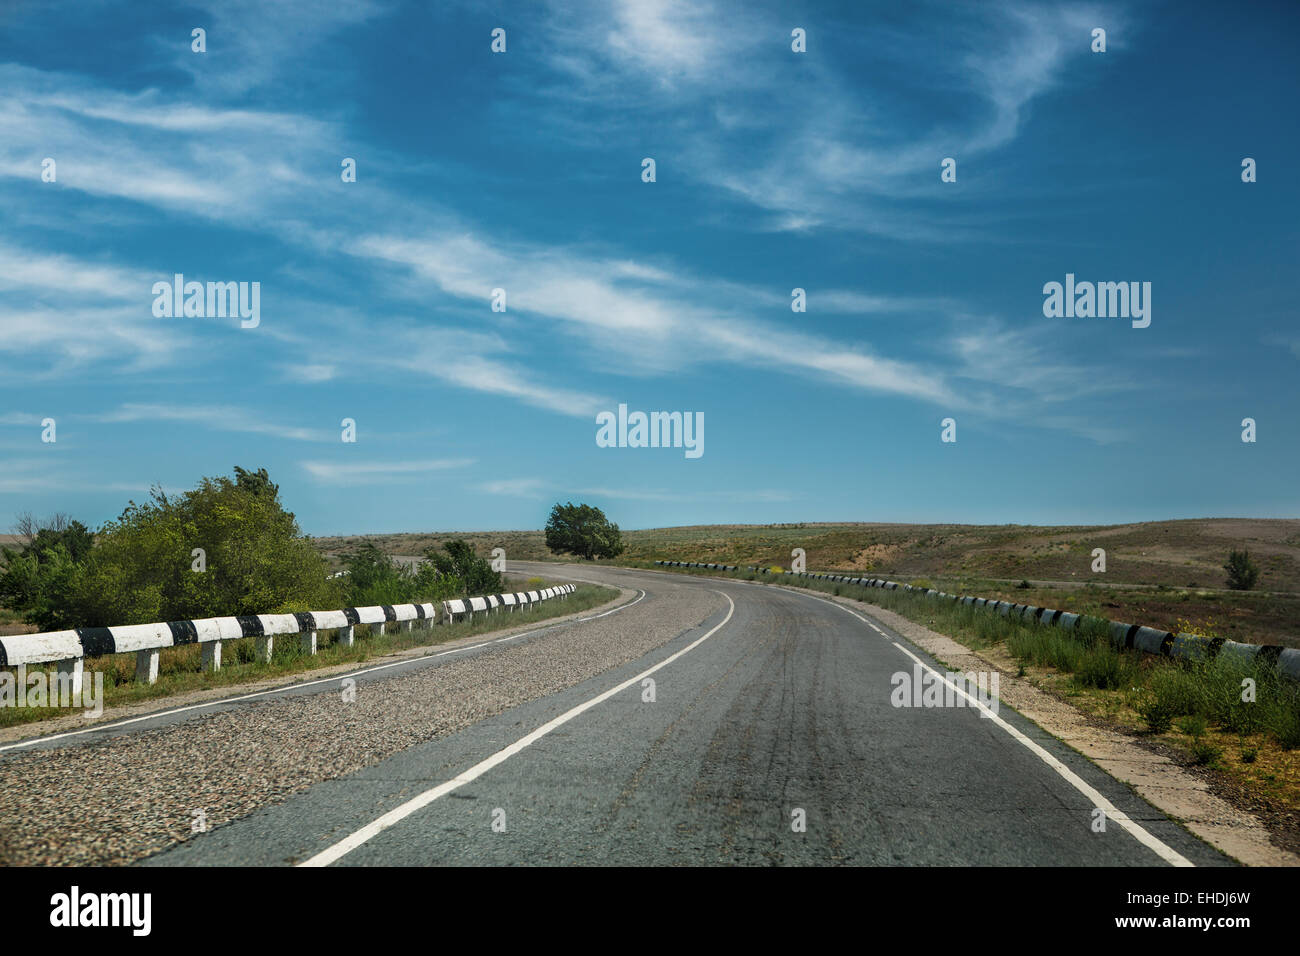 road with dividing line Stock Photo